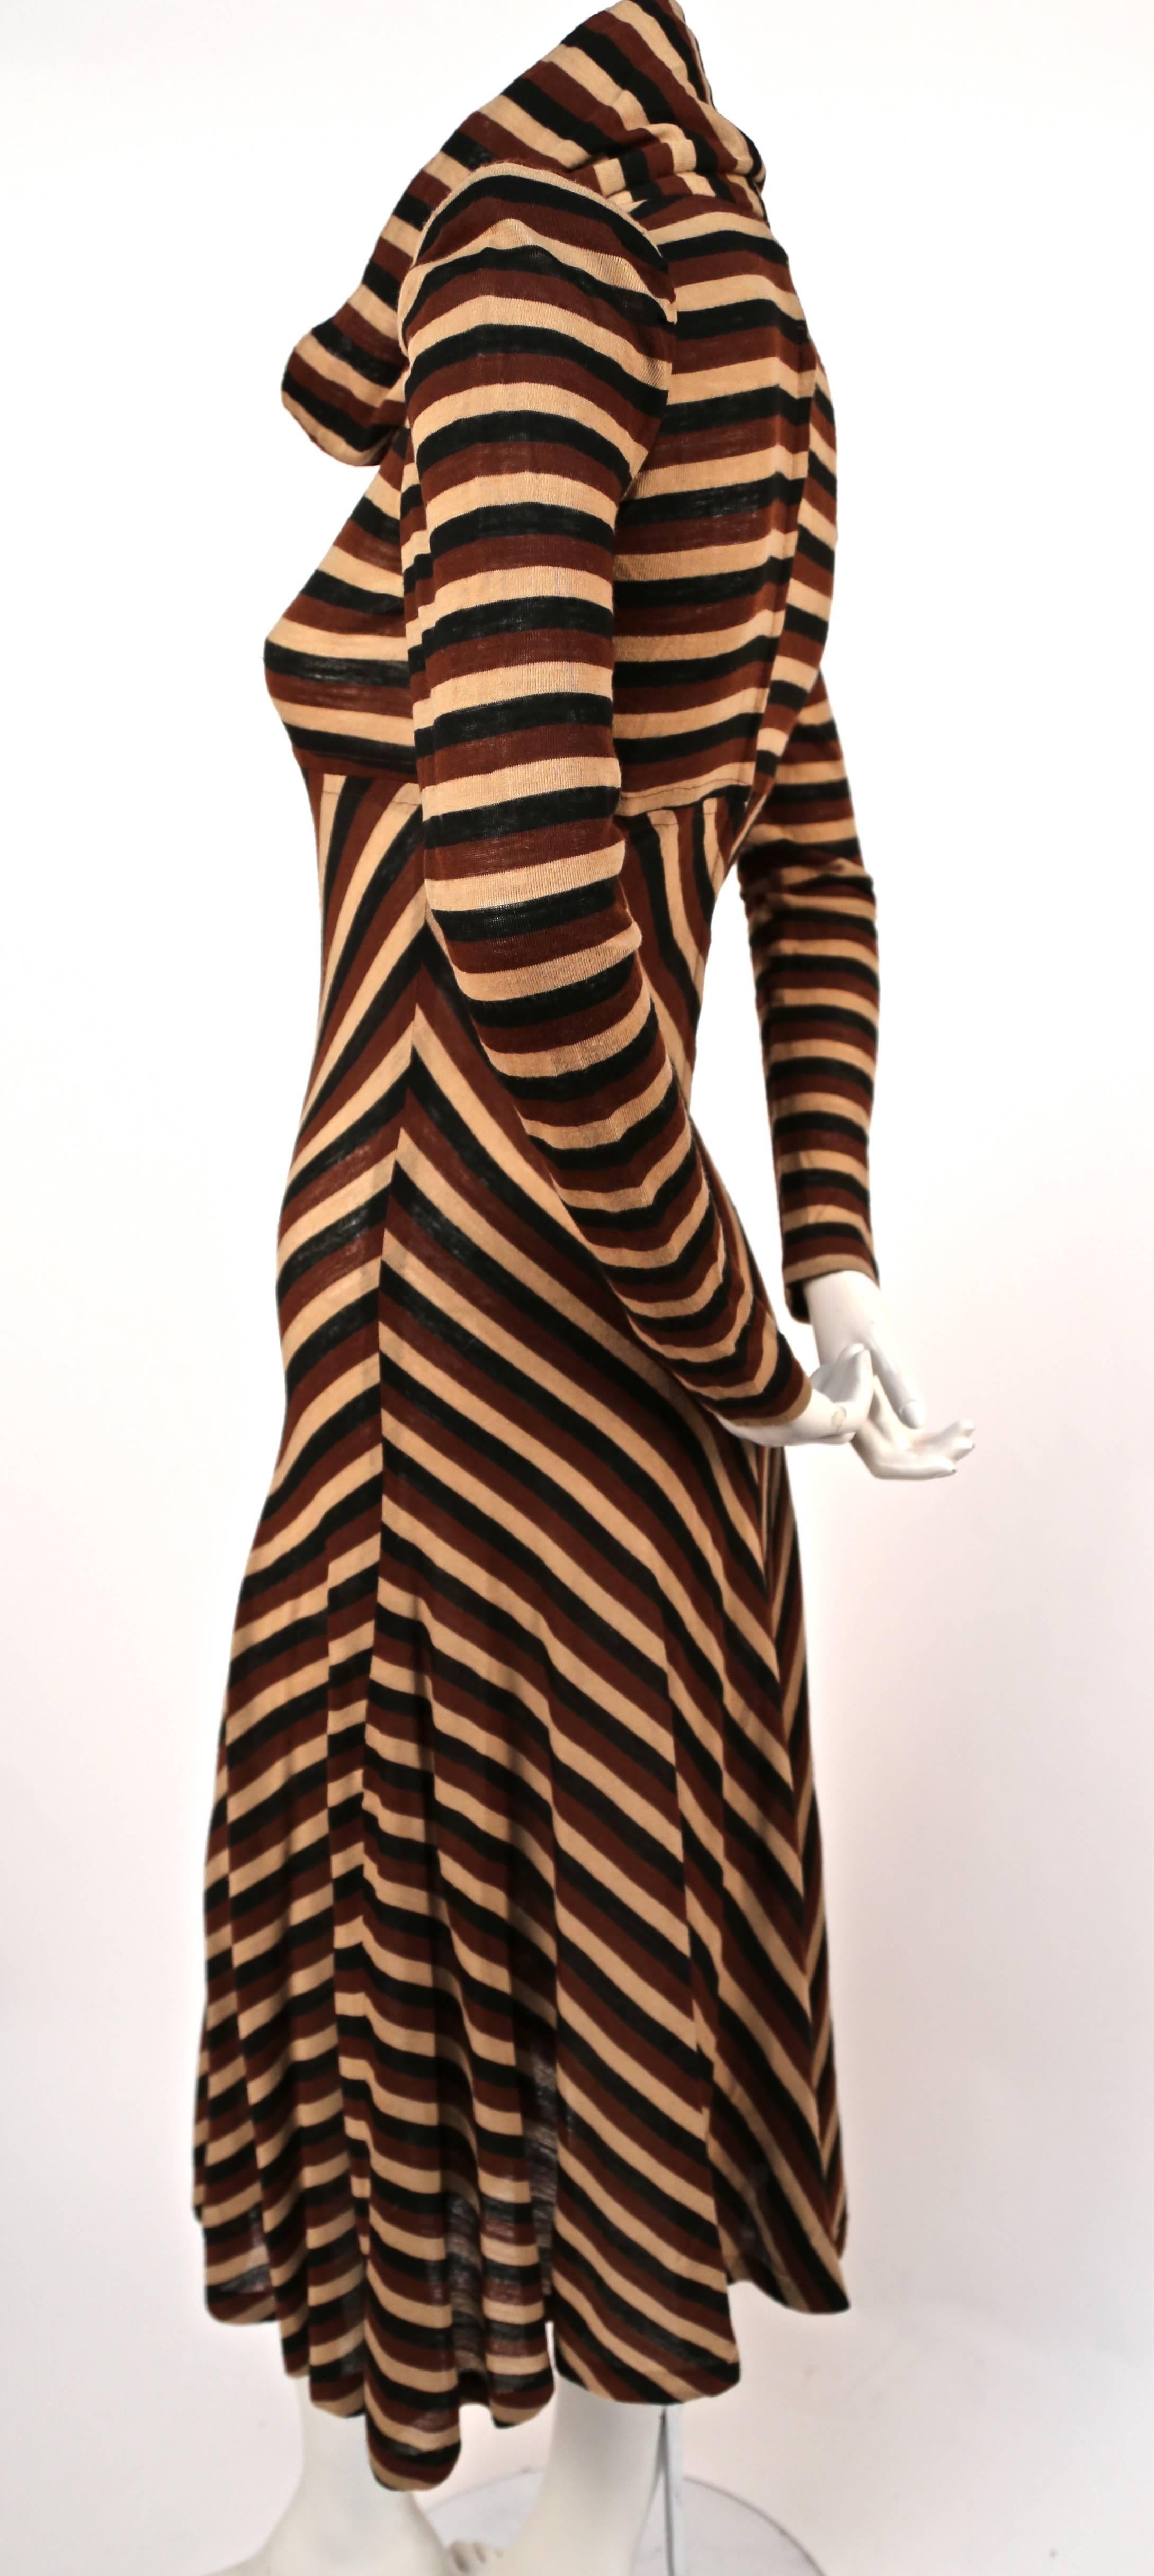 Metallic brown, cream and black striped wool jersey dress with cowl neckline and chevron design from Biba dating to the 1970's. Best fits a US 2 or slim 4. Zips up center back. Made in the U.K. Excellent condition. 